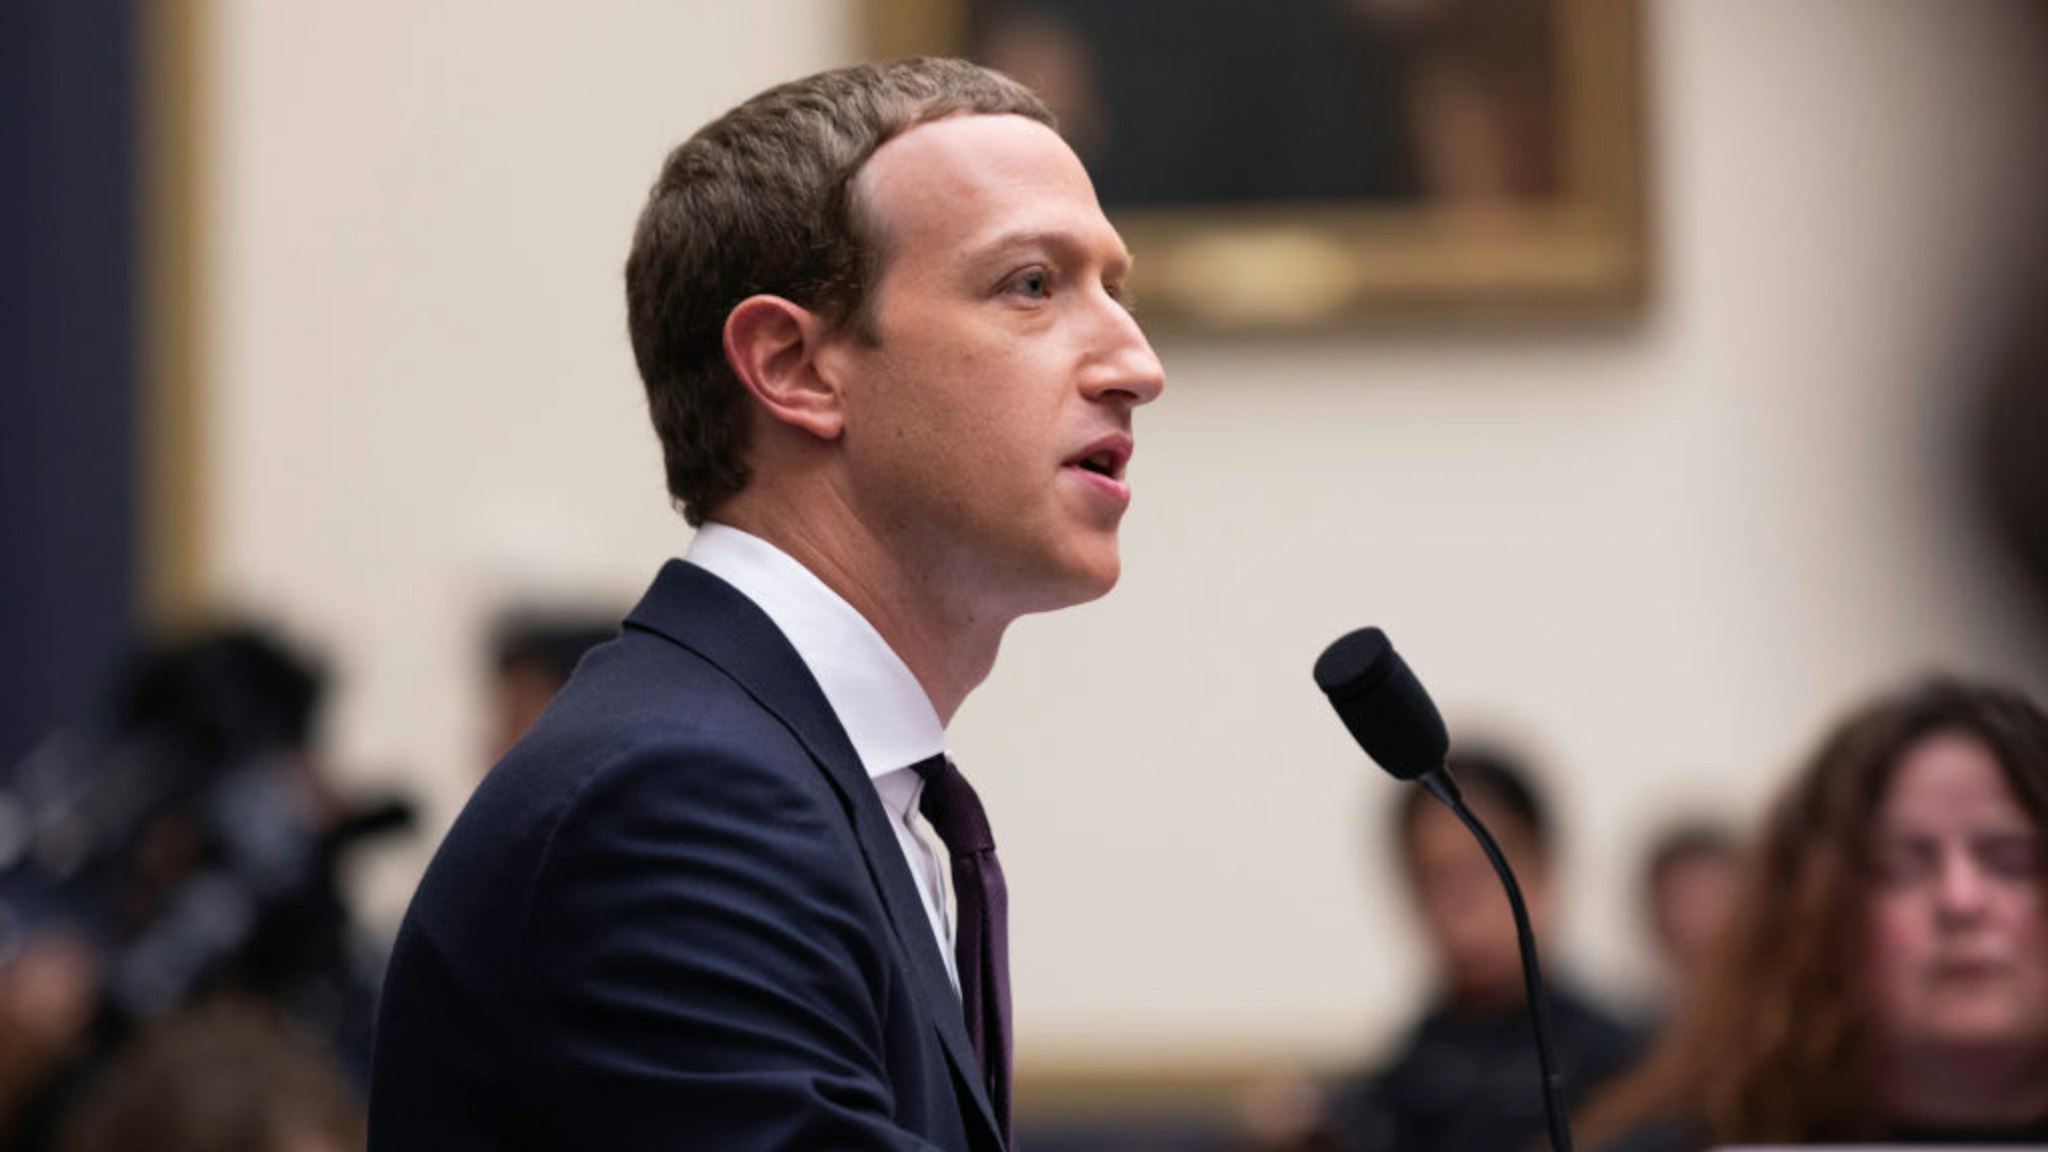 The Facebook CEO, Mark Zuckerberg, testified before the House Financial Services Committee on Wednesday October 23, 2019 Washington, D.C.